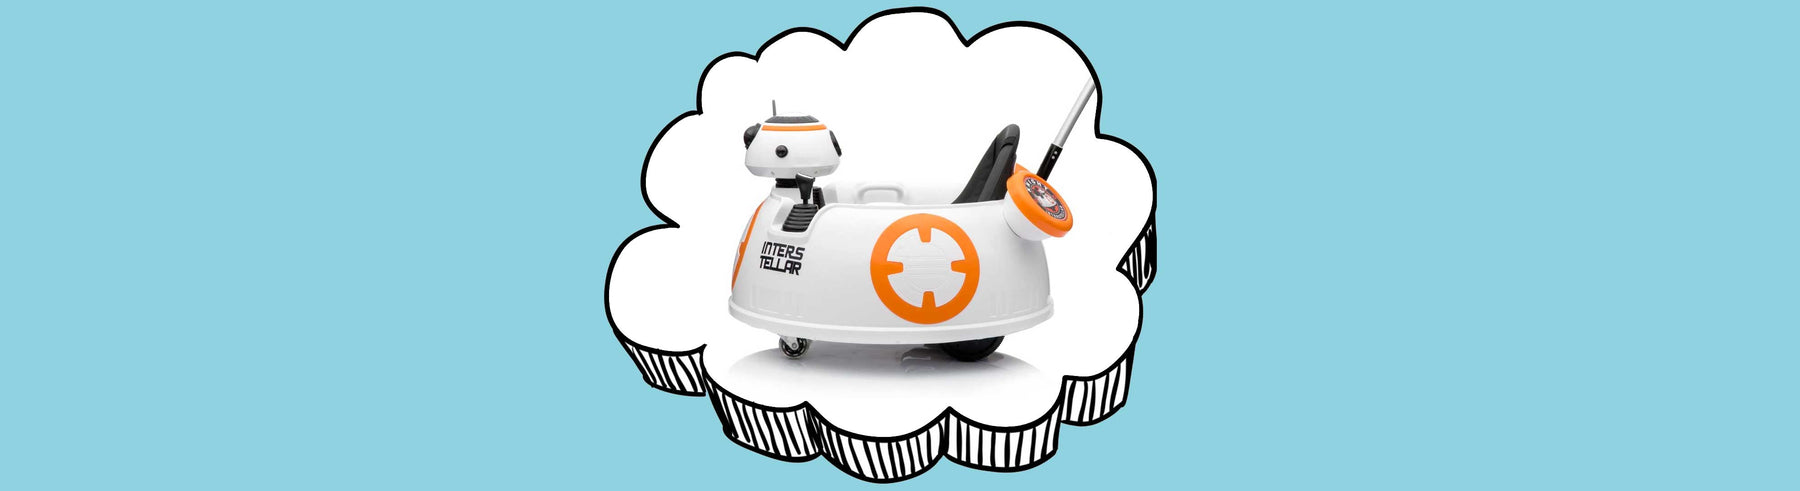 Star Wars BB8 Inspired Kids Ride On Car with Remote Control